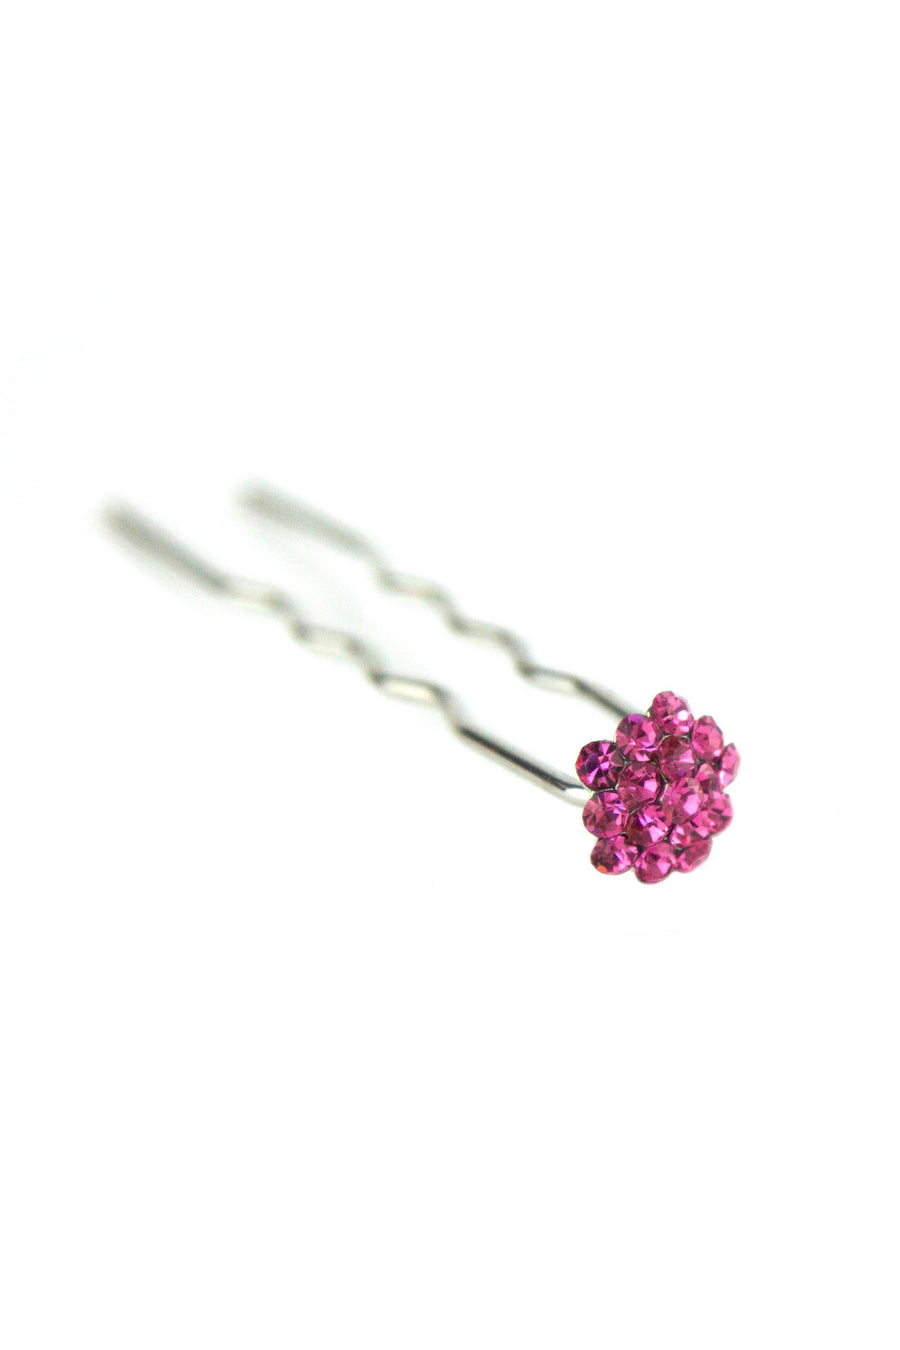 Soho Style Stick Hot Pink Mini Crystal Cluster Hair Stick